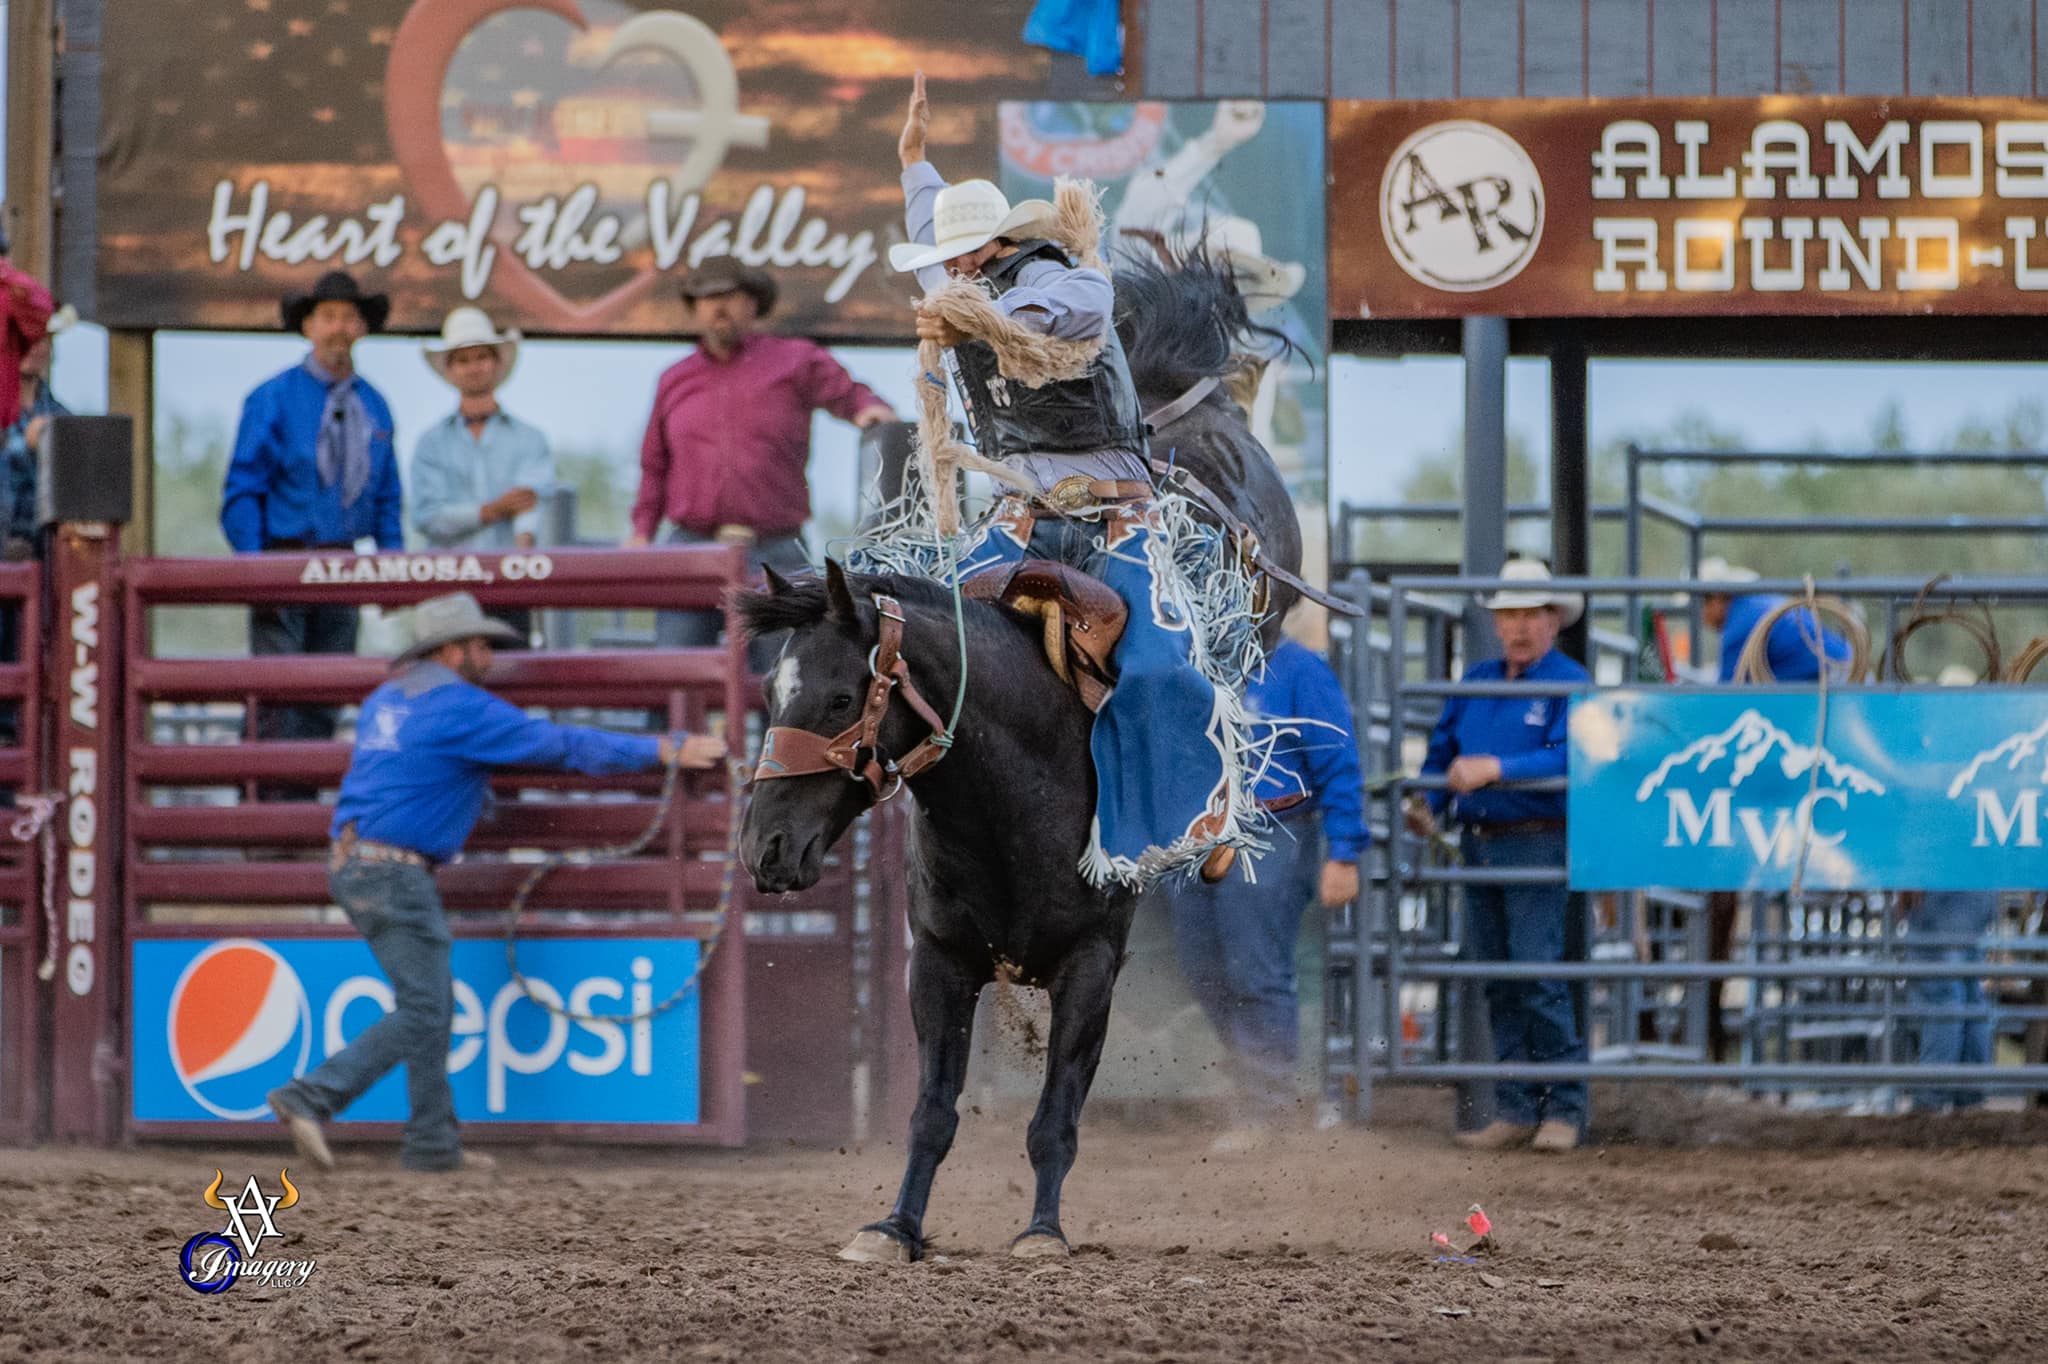 Person on a bucking horse in the middle of a rodeo ring for Alamosa's annual Round-UP Rodeo